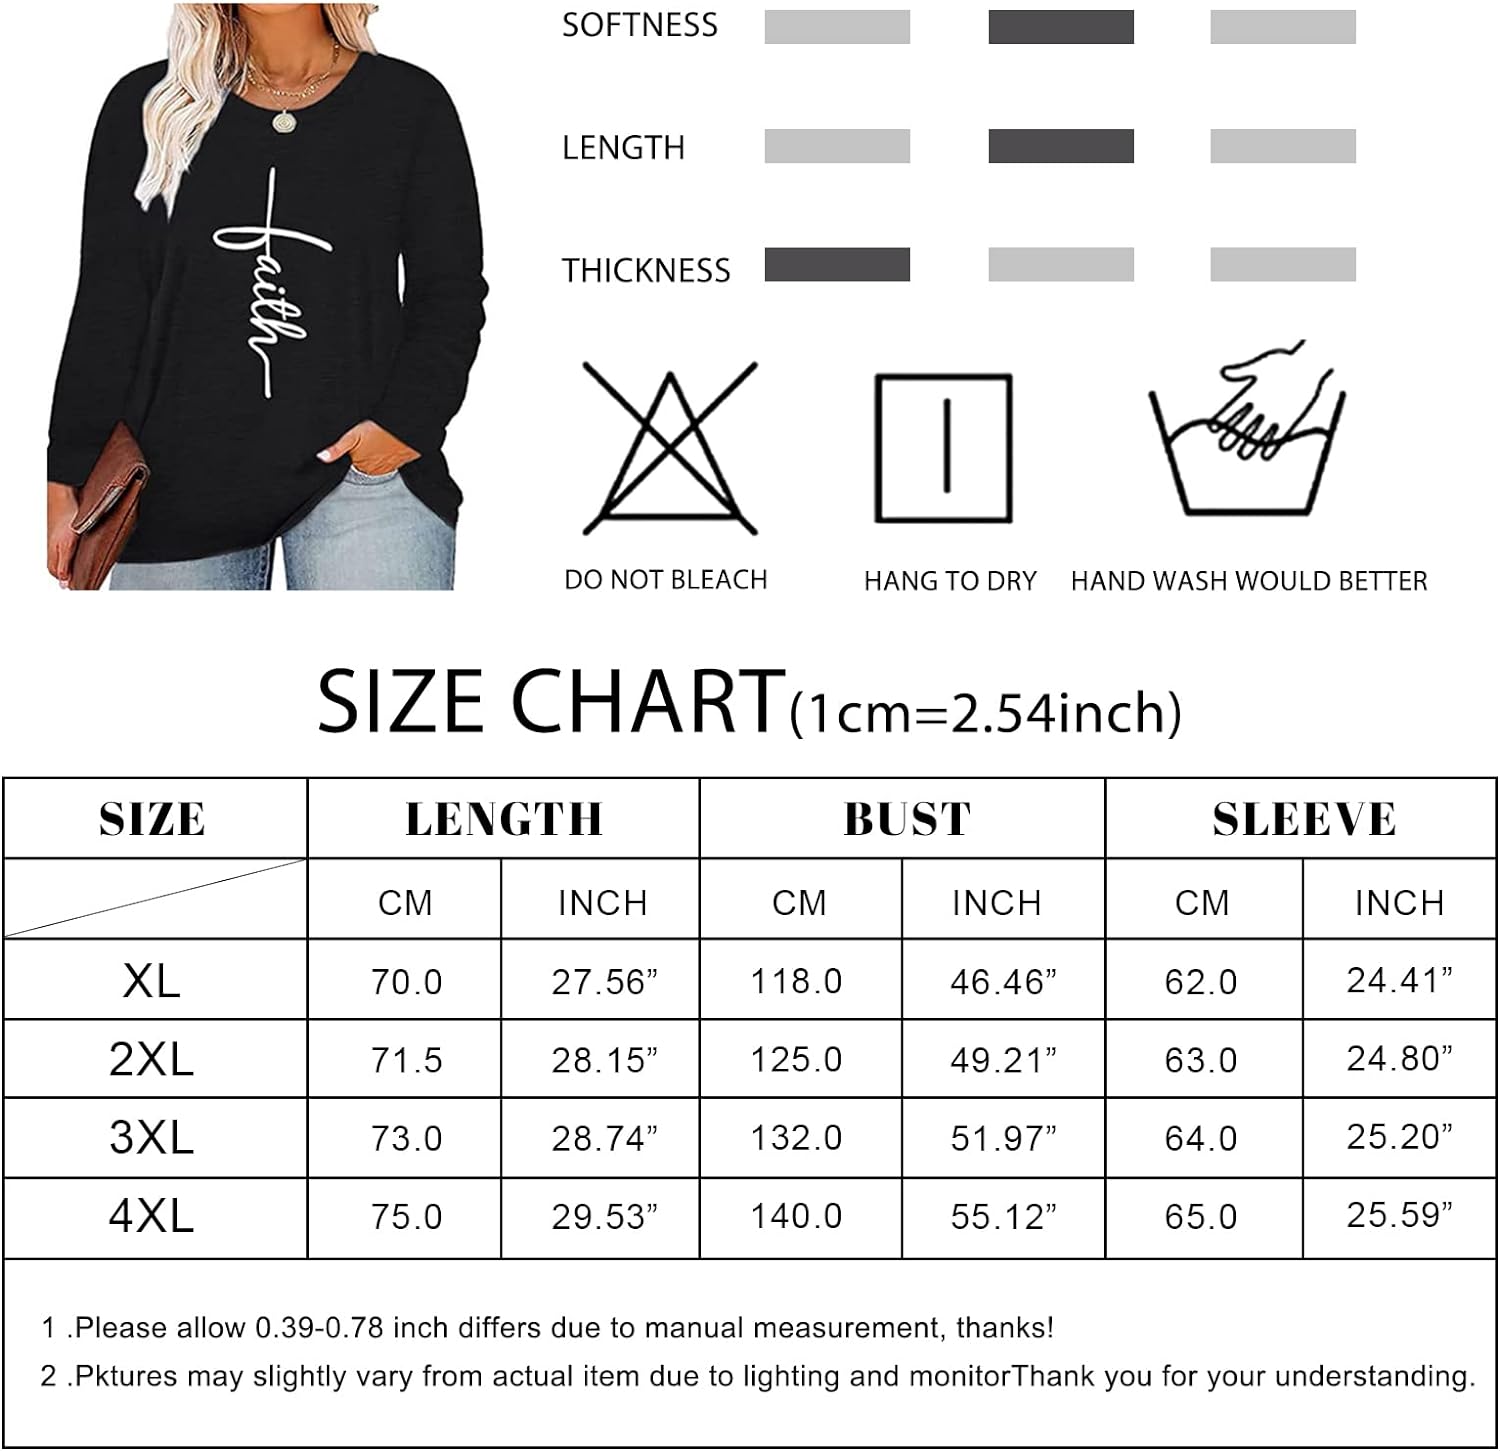 Plus Size Faith Shirts Women Long Sleeve Graphic Tees: A Comfortable and Stylish Choice